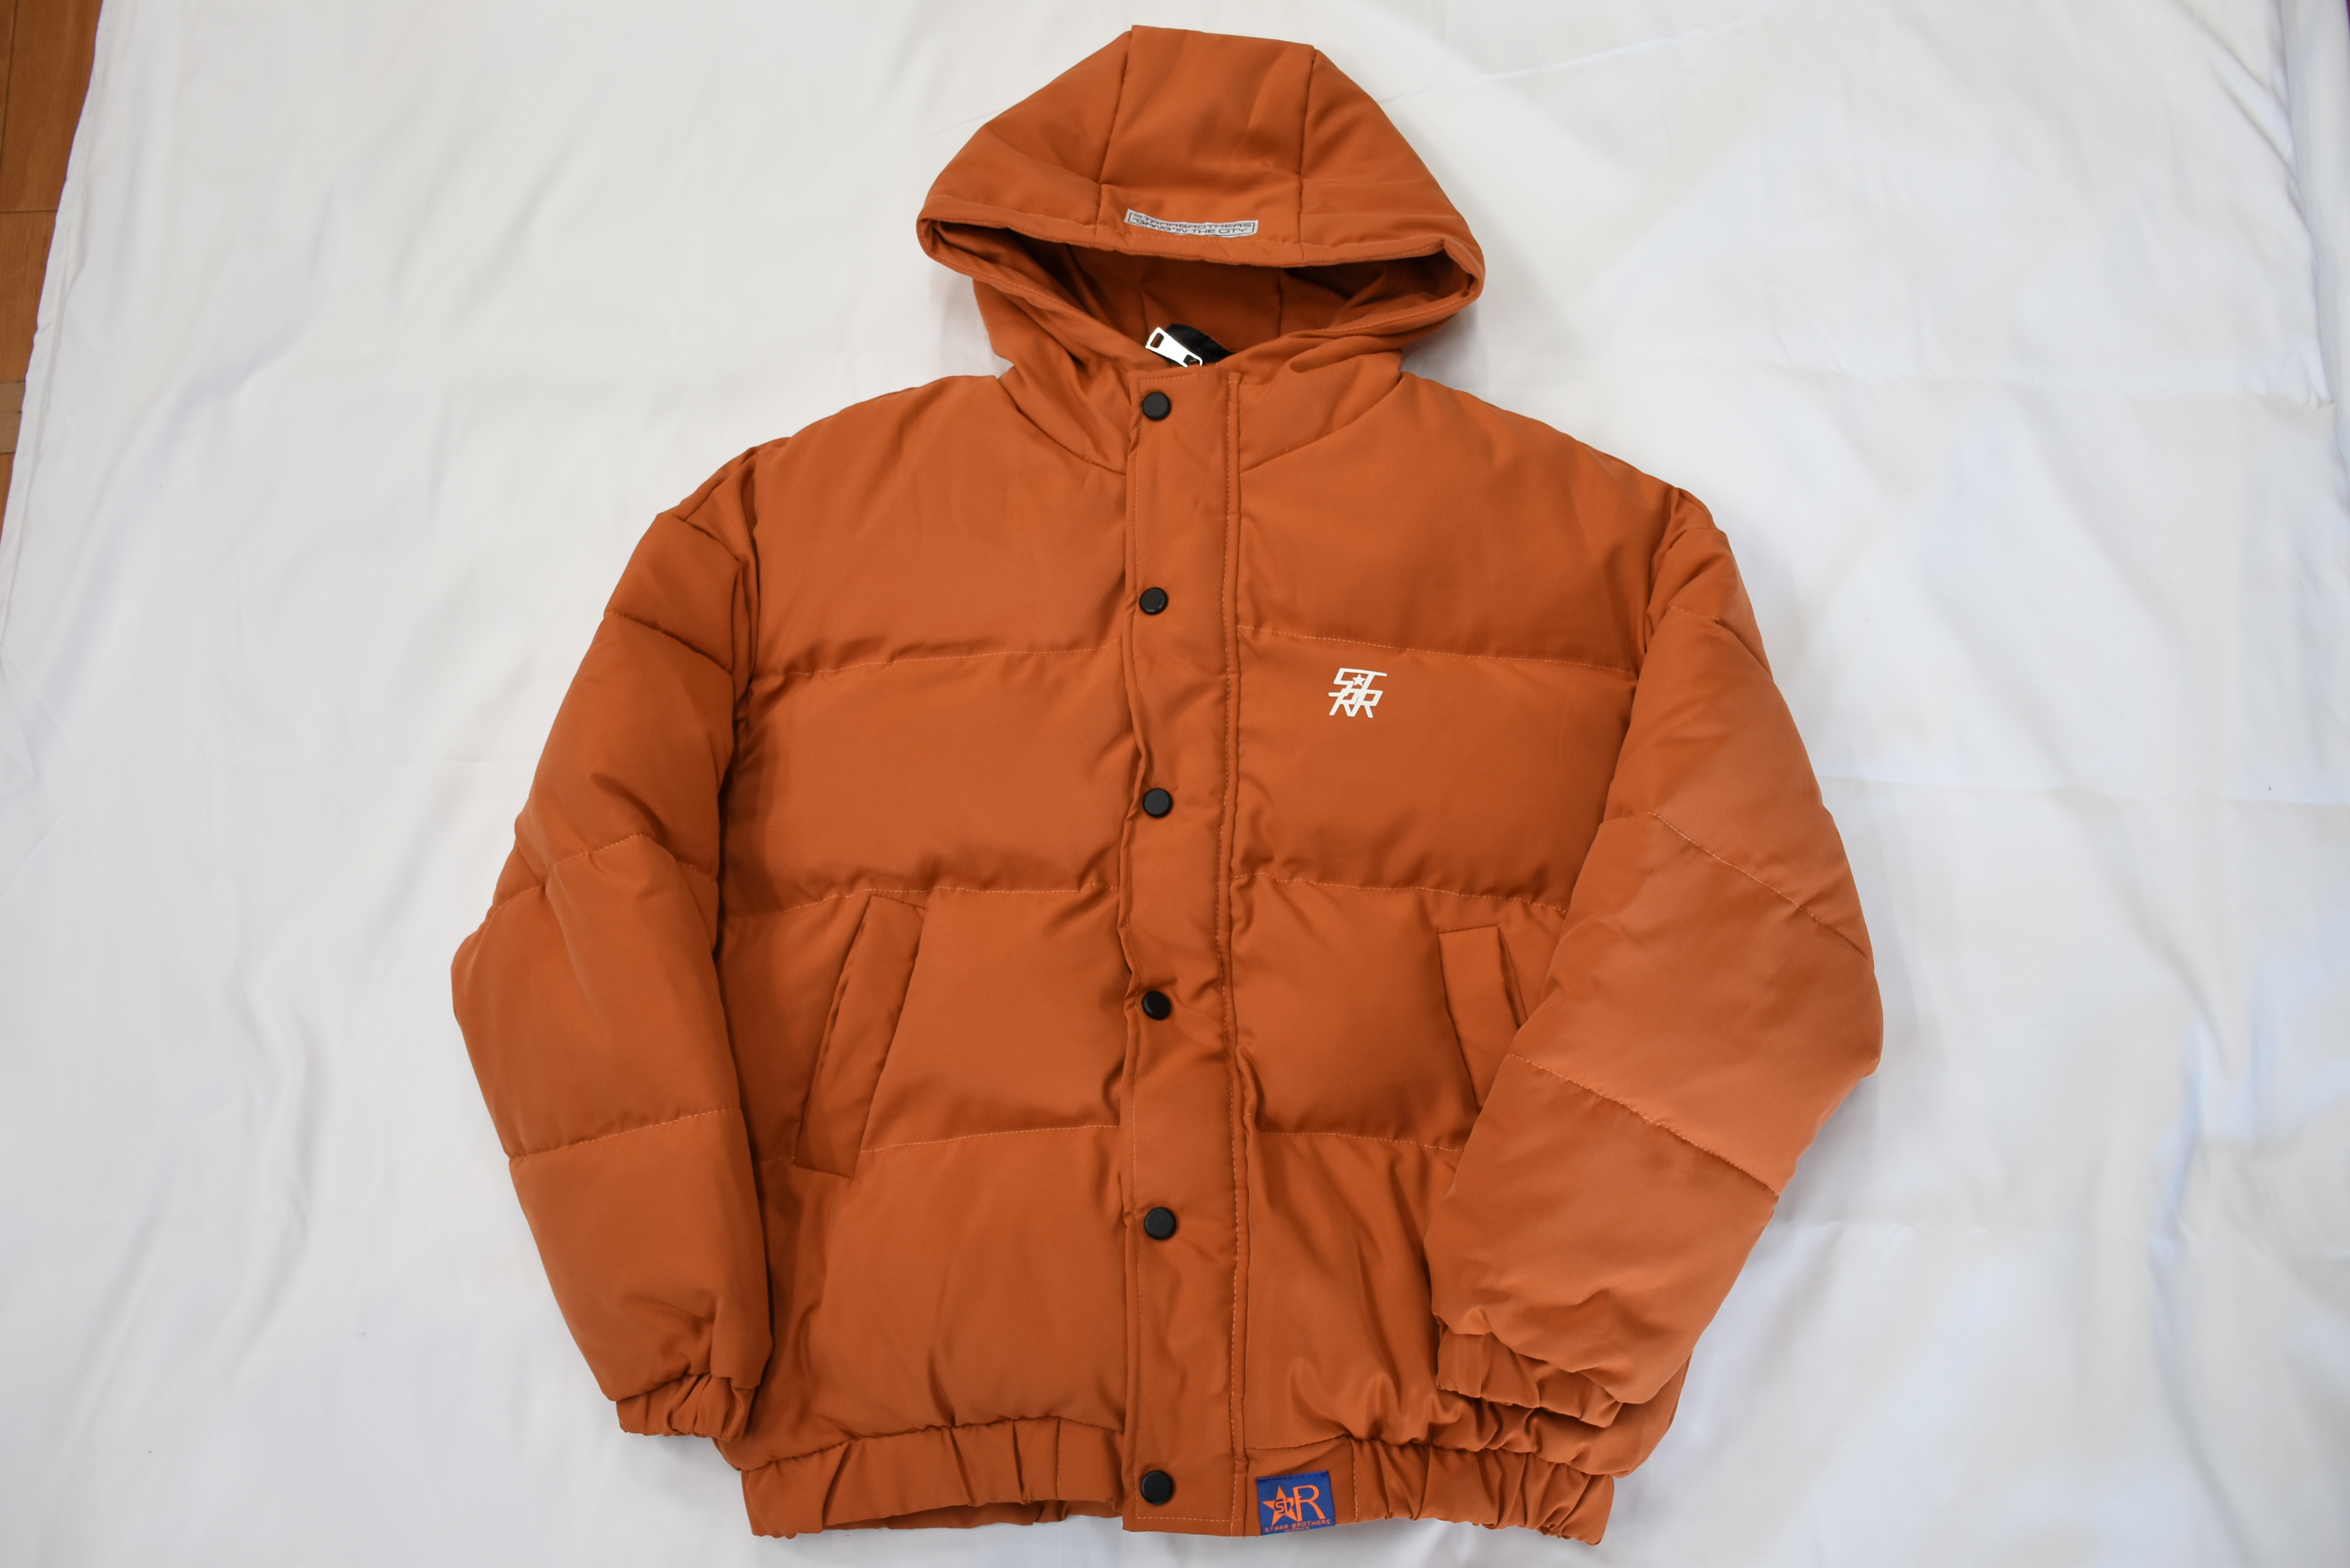 STARRBROS_GANG_IN_THE_CITY_JACKET_ORANGE